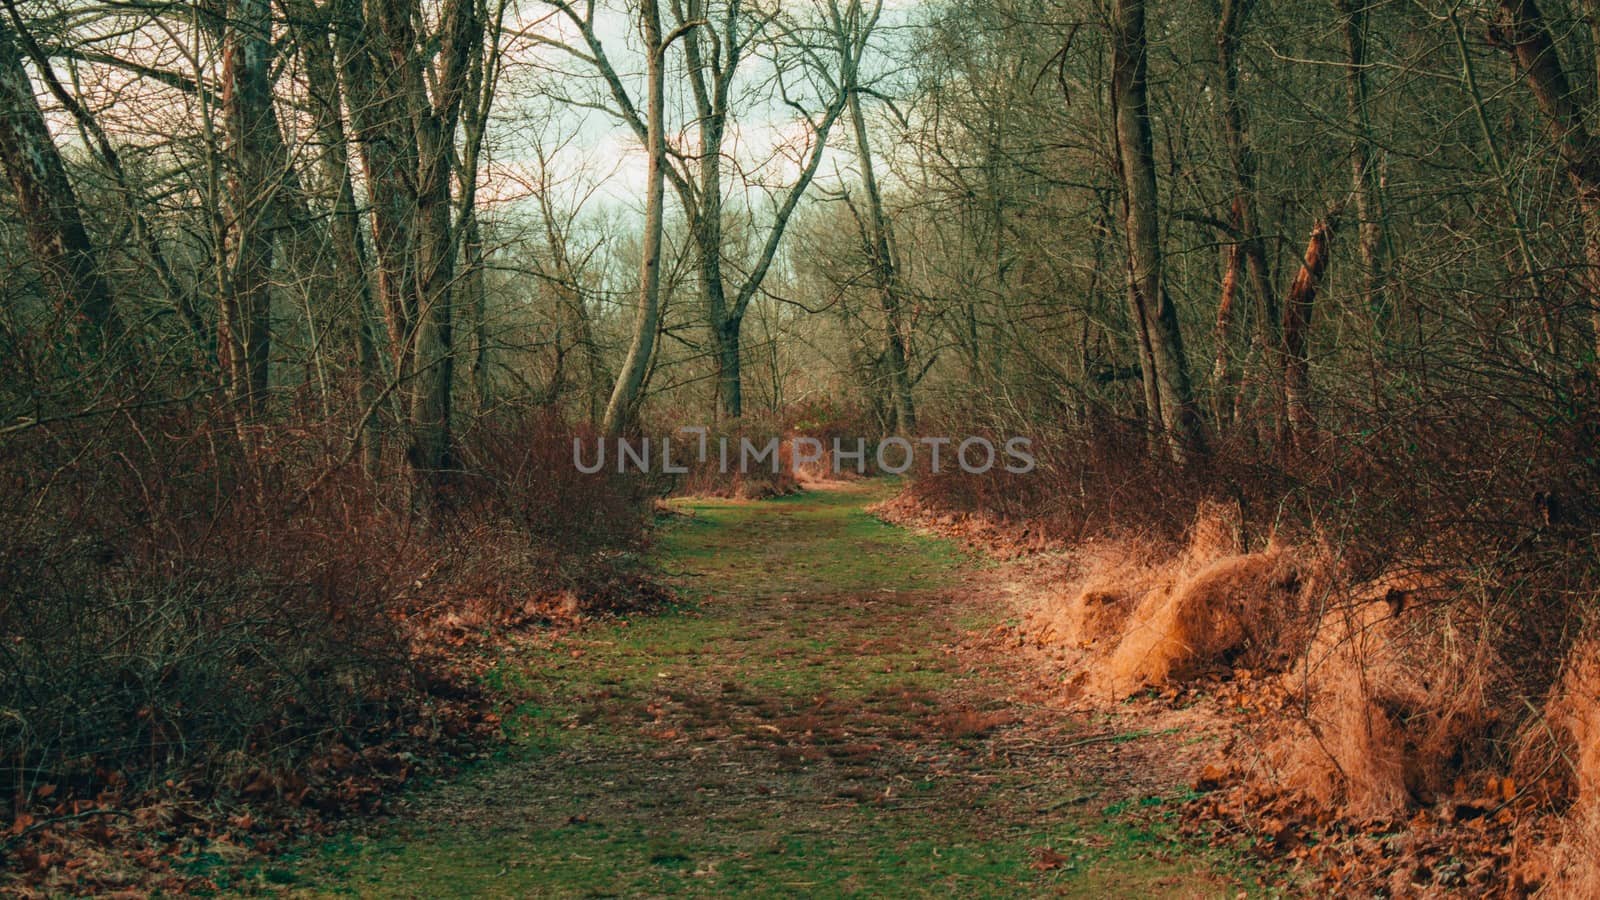 A Grassy Overgrown Path Covered in Foliage in a Dead Winter Forest